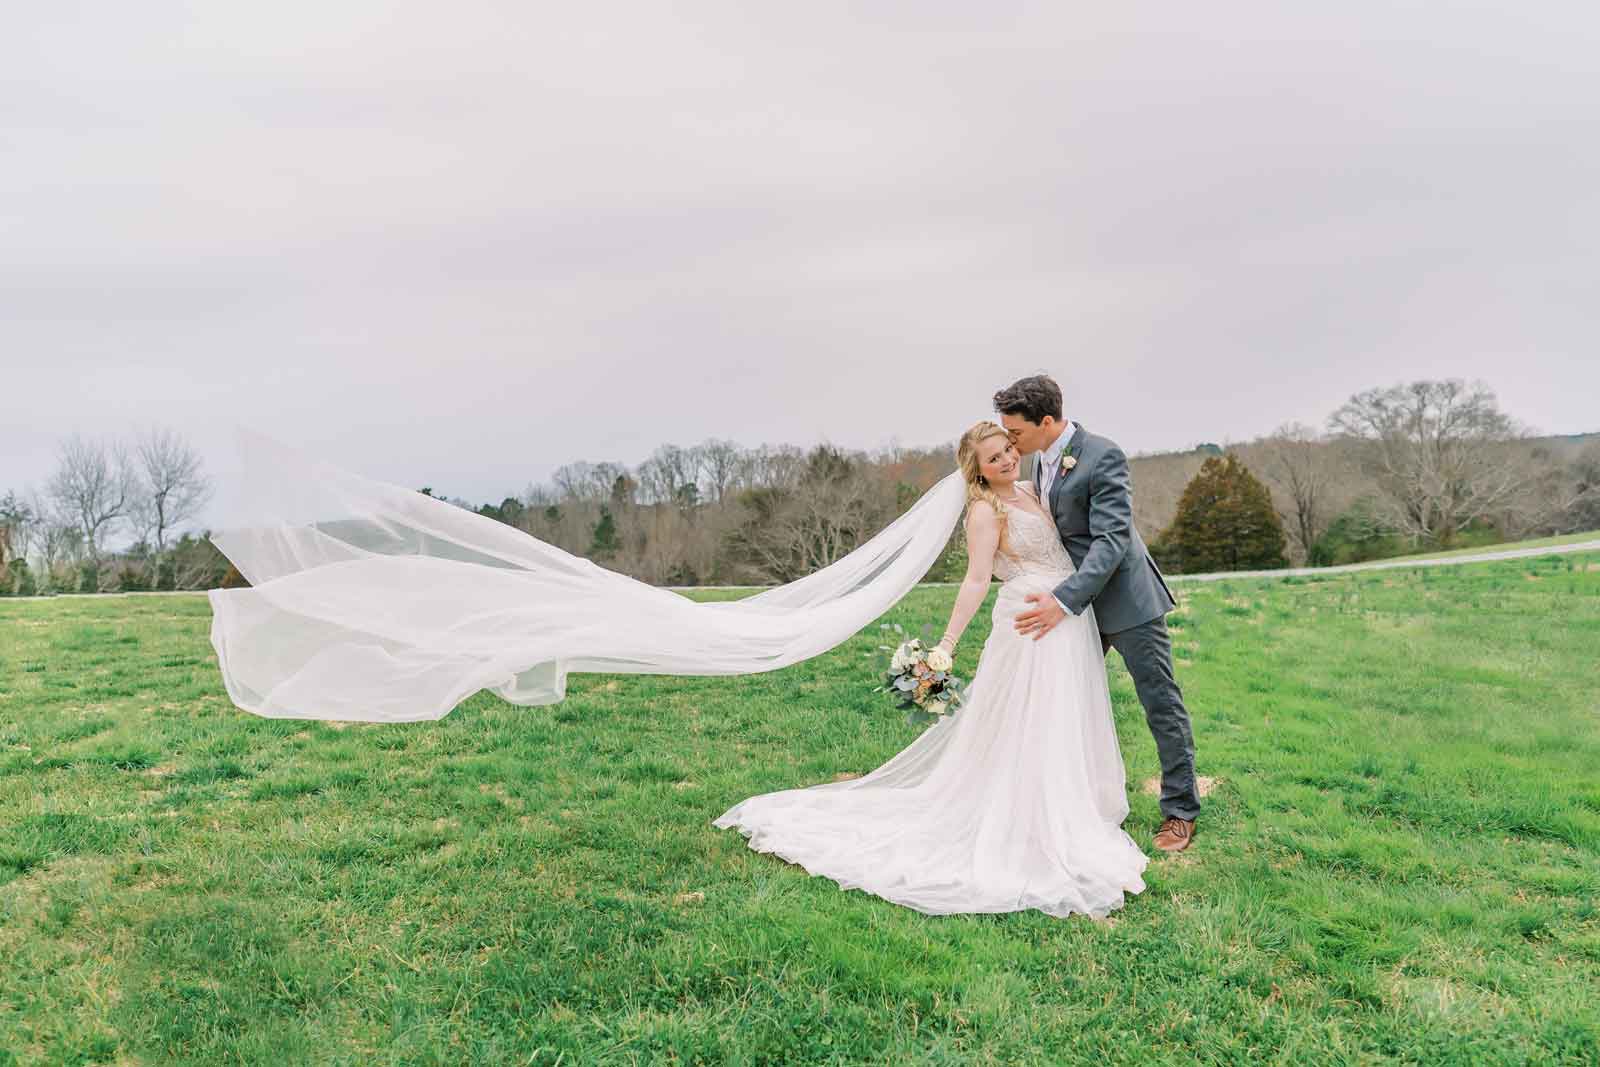 wedding veil floating in the wind